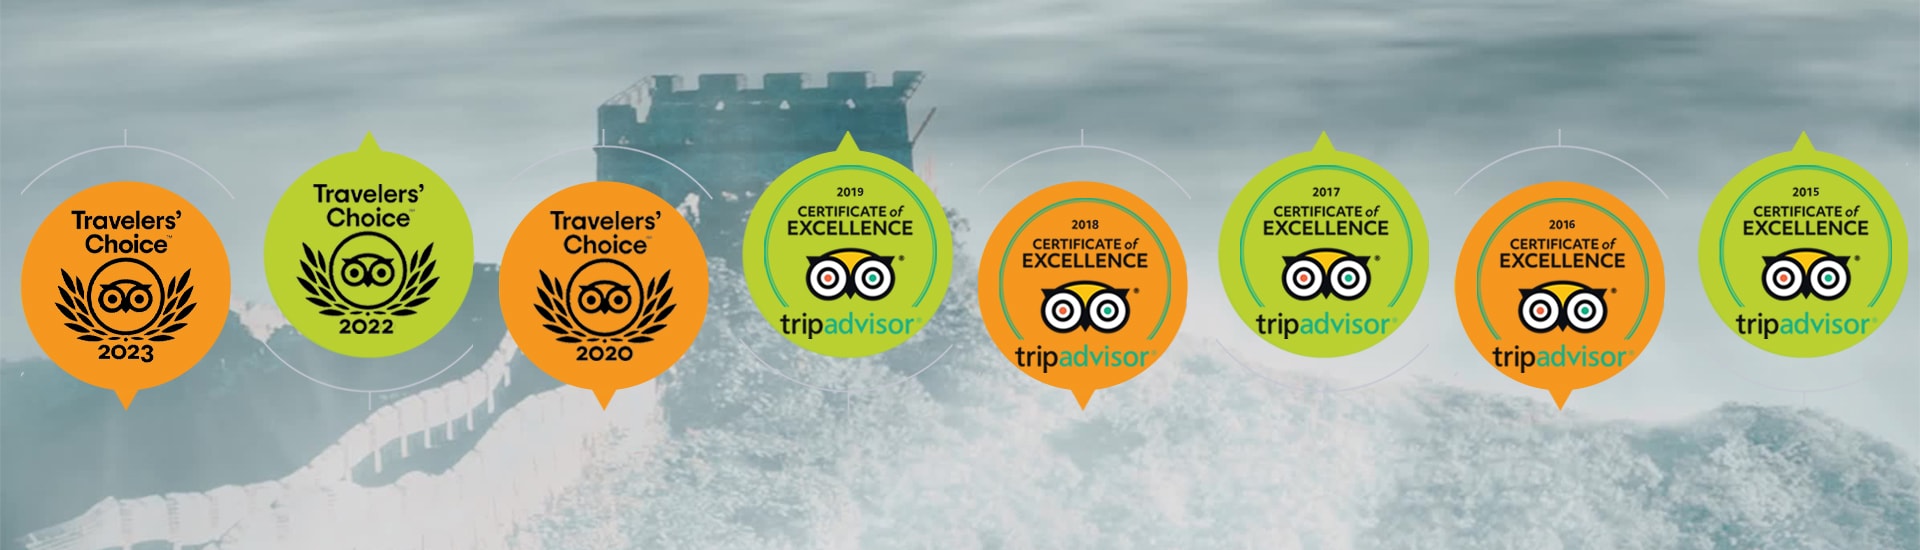 Reviews about China Discovery on TripAdvisor